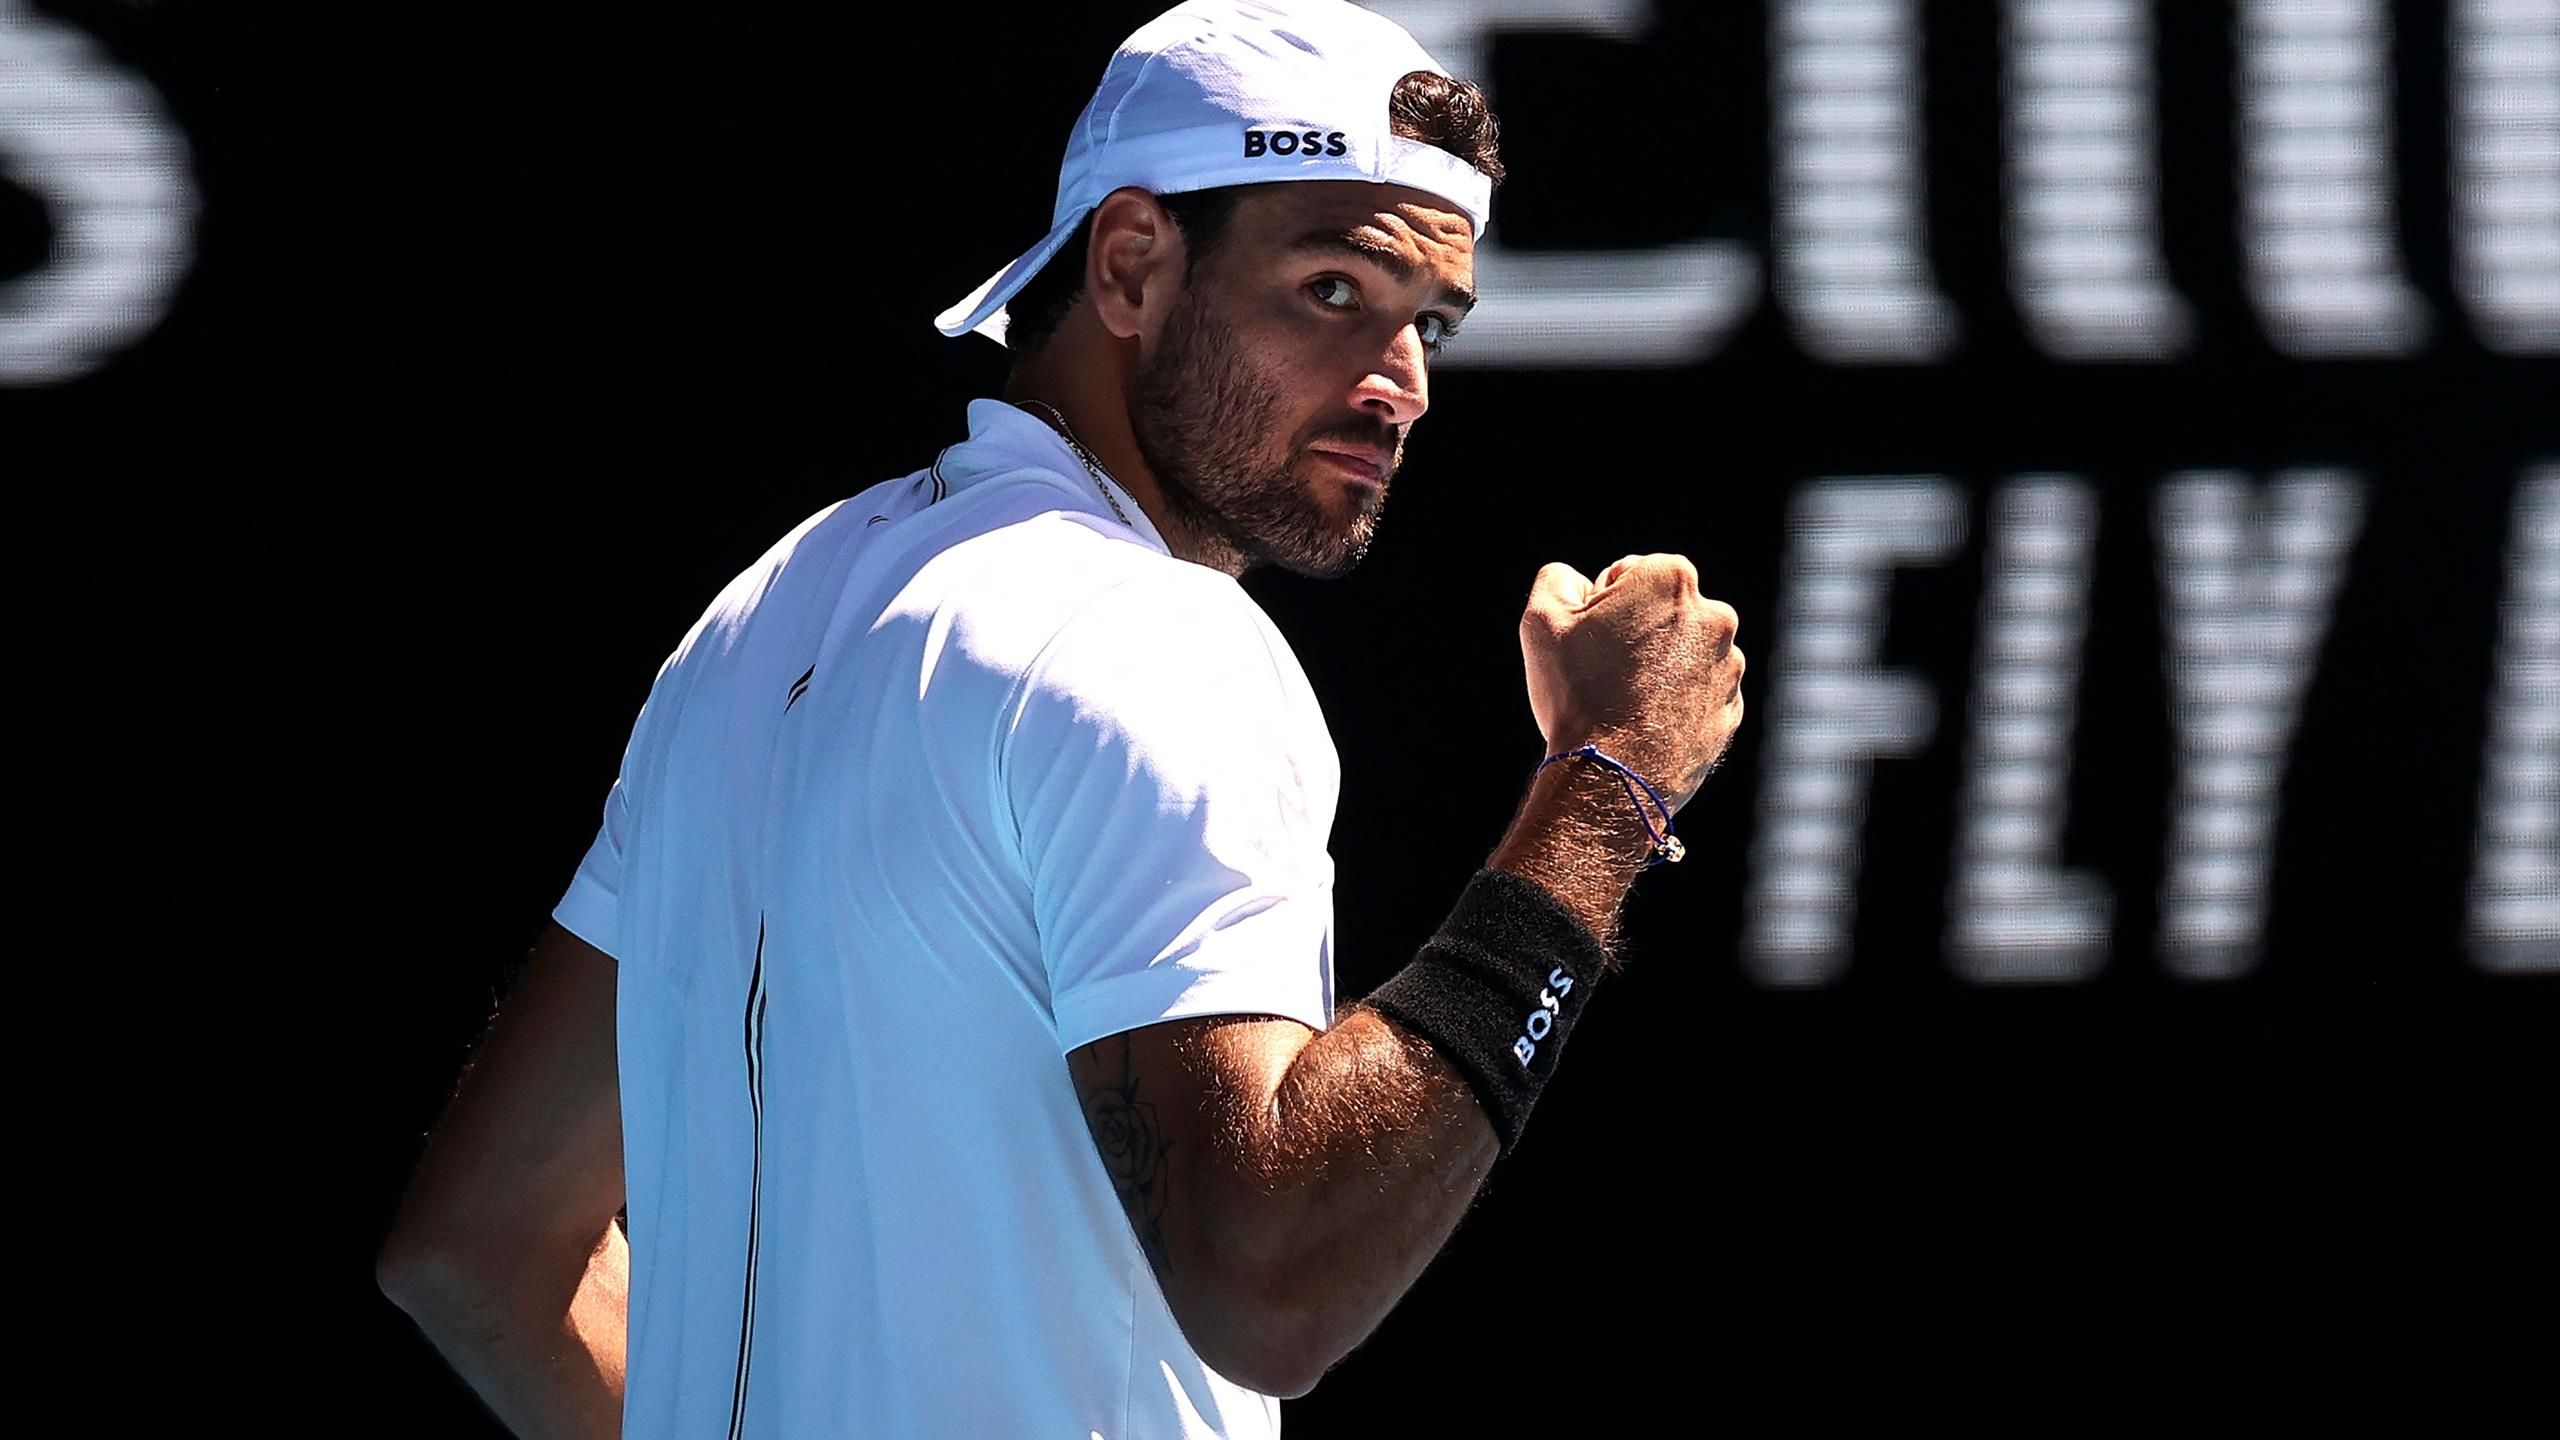 Carlos Alcaraz knocked out of the Australian Open by Matteo Berrettini in a five-set epic